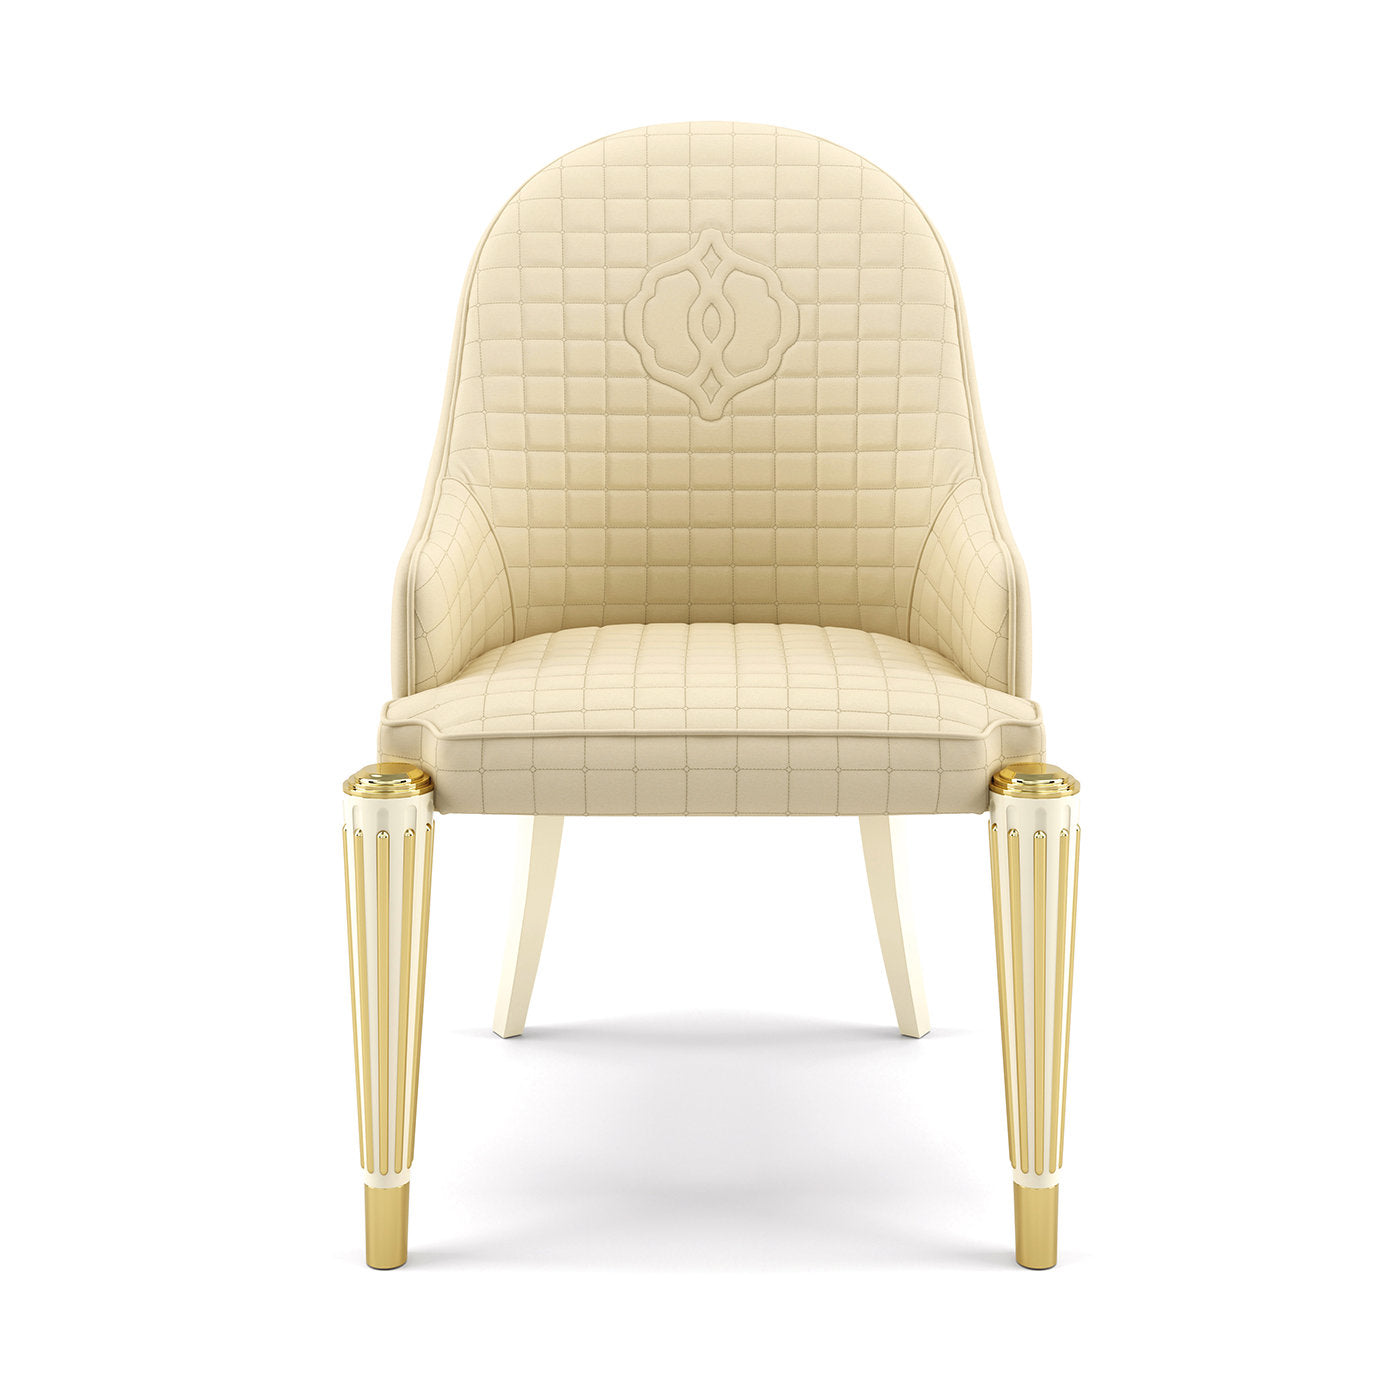 Ophelia Dining Chair with Armrests - Alternative view 1